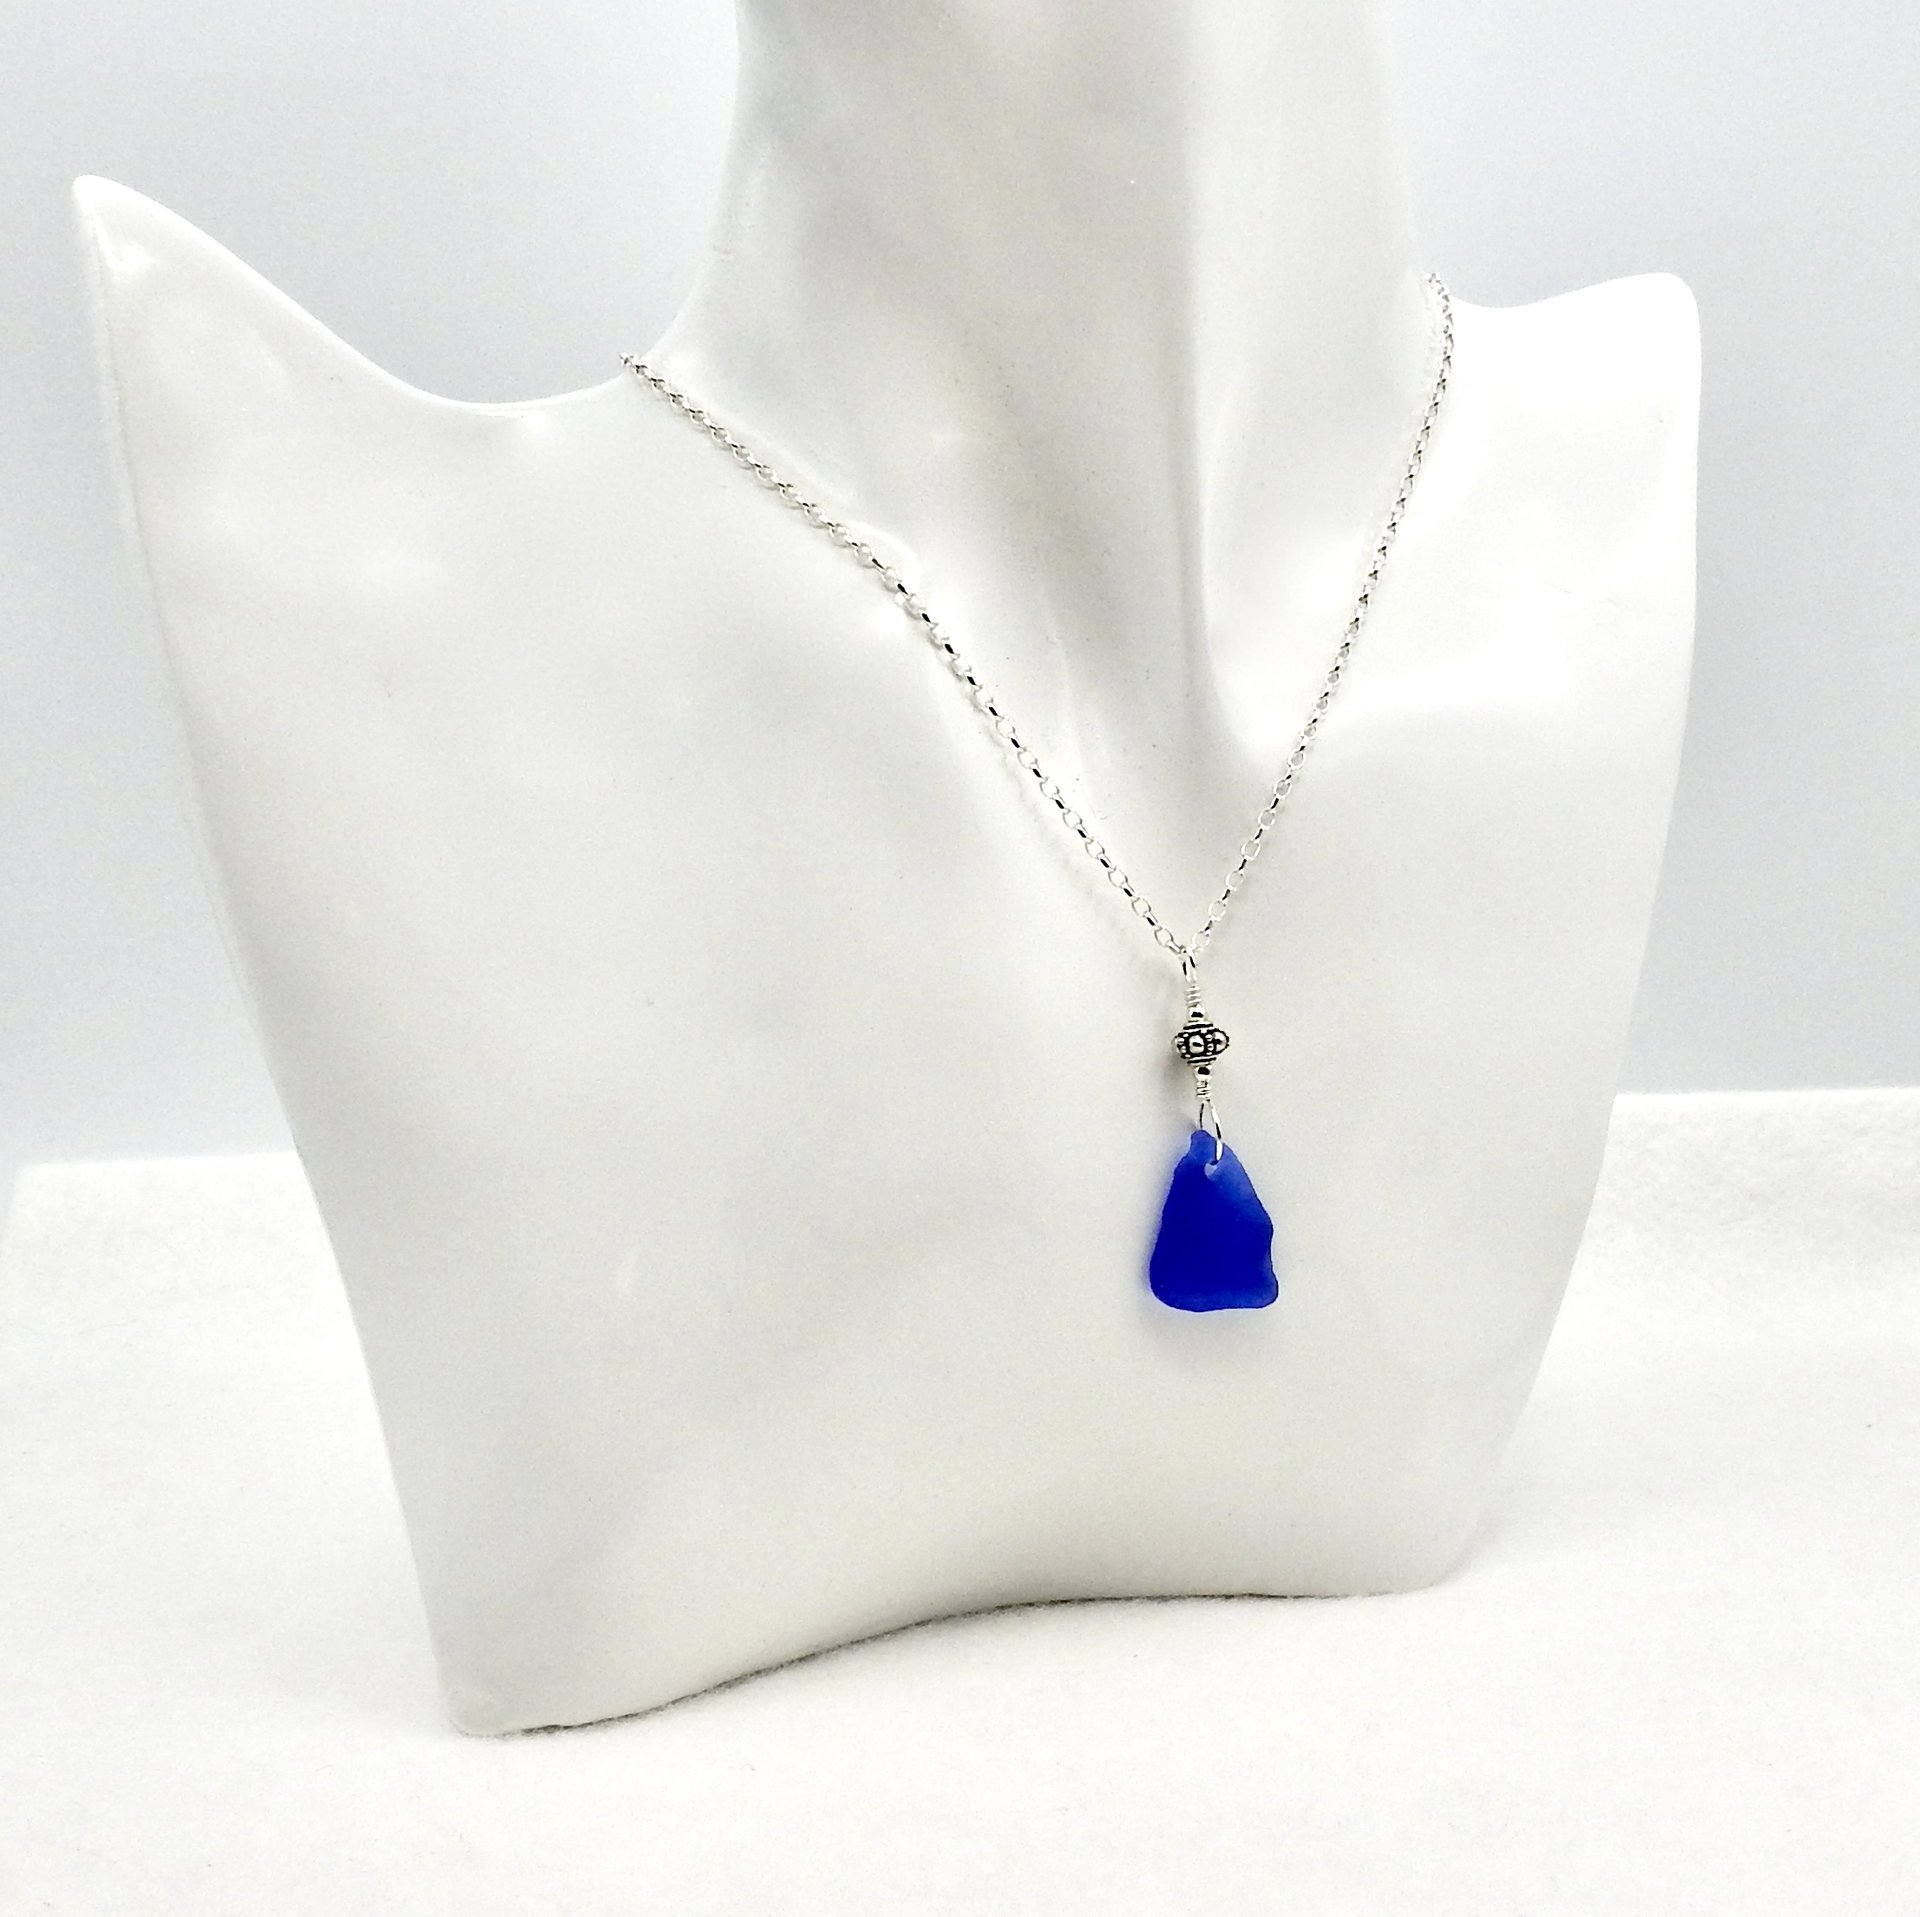 Cobalt blue color pipe seed bead Necklace necklace